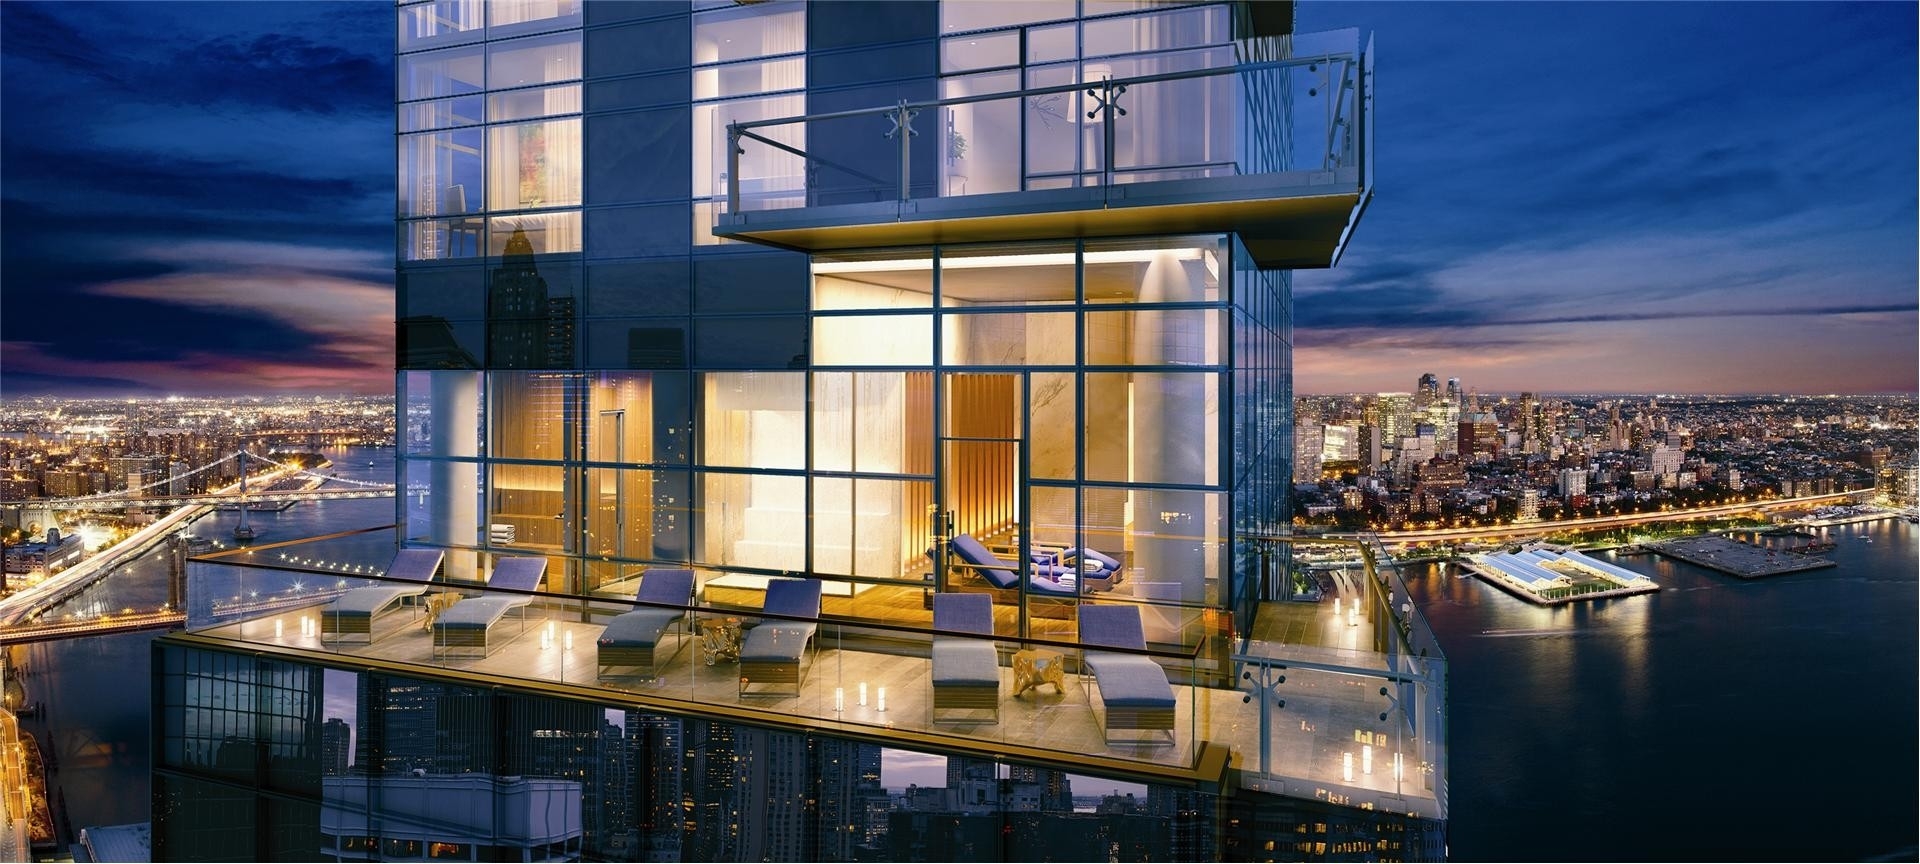 16. Condominiums for Sale at Seaport Residences, 161 MAIDEN LN, 33A South Street Seaport, New York, New York 10038